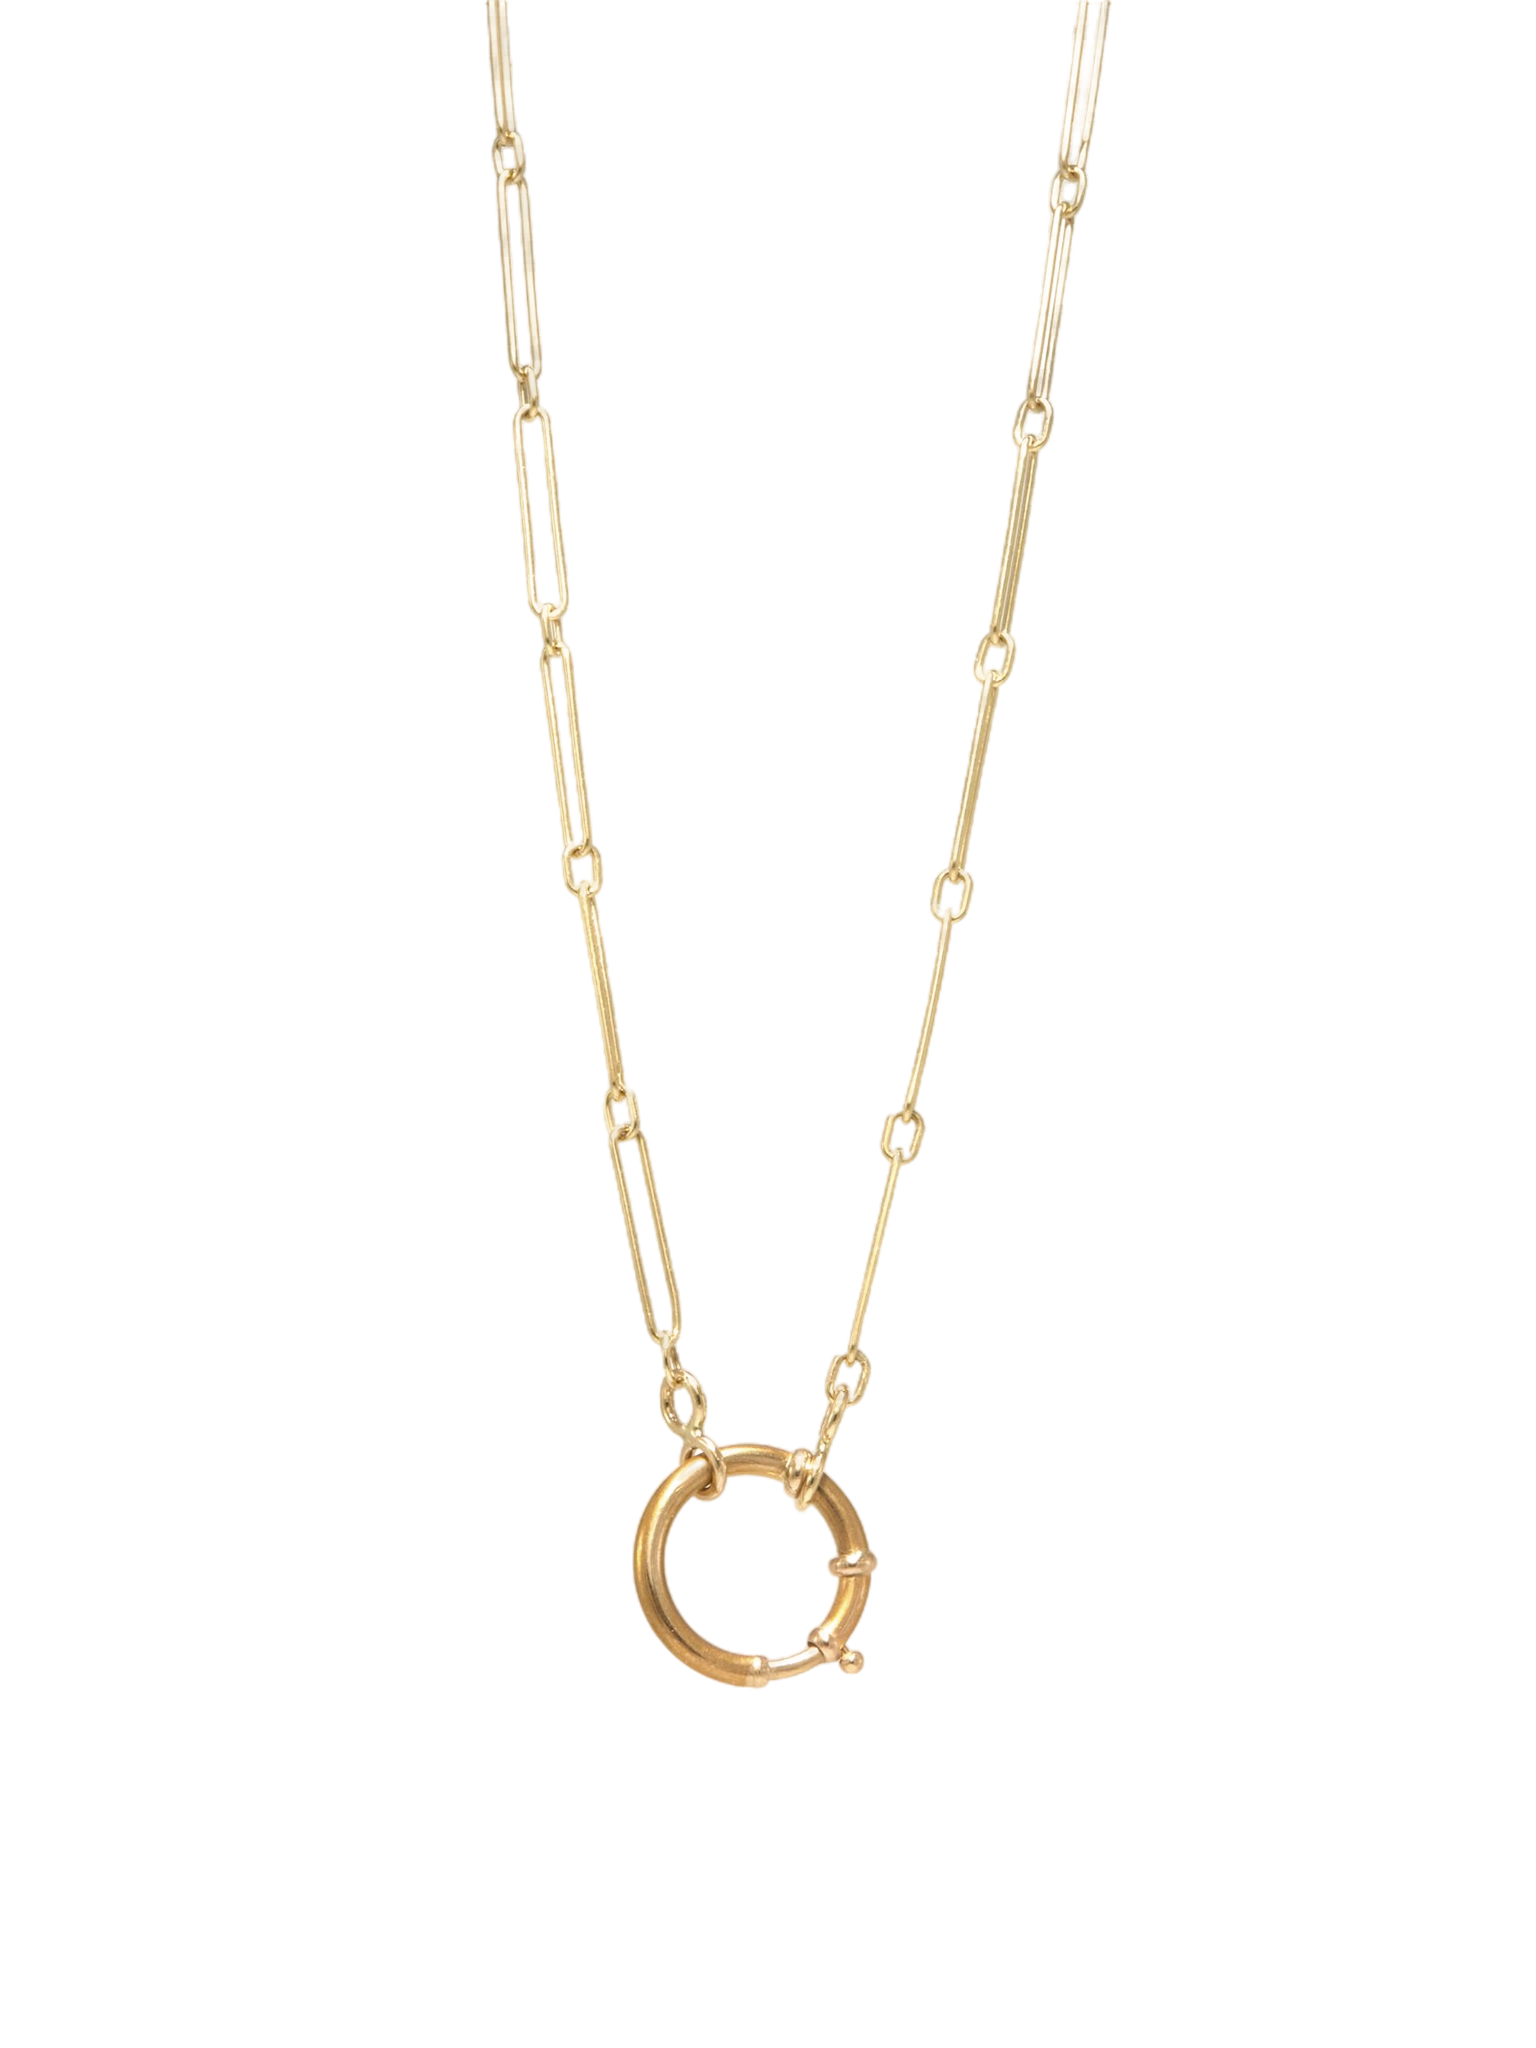 Petite trombone chain with bolt clasp